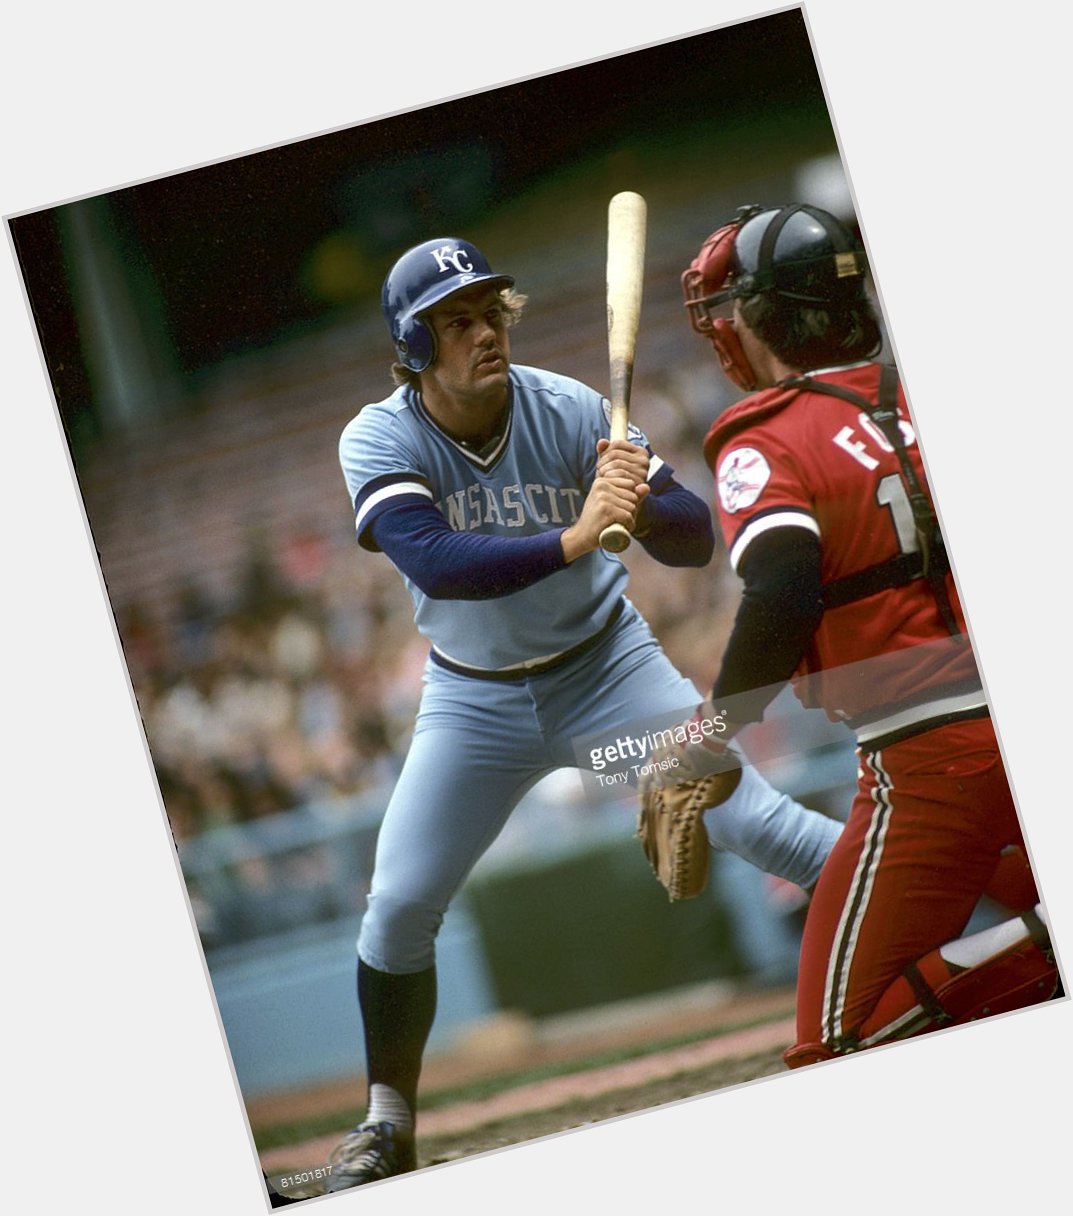 Happy bday to HOFer George Brett, the greatest hitter of the 80s. I can\t believe he\s 64 now. Time flies 